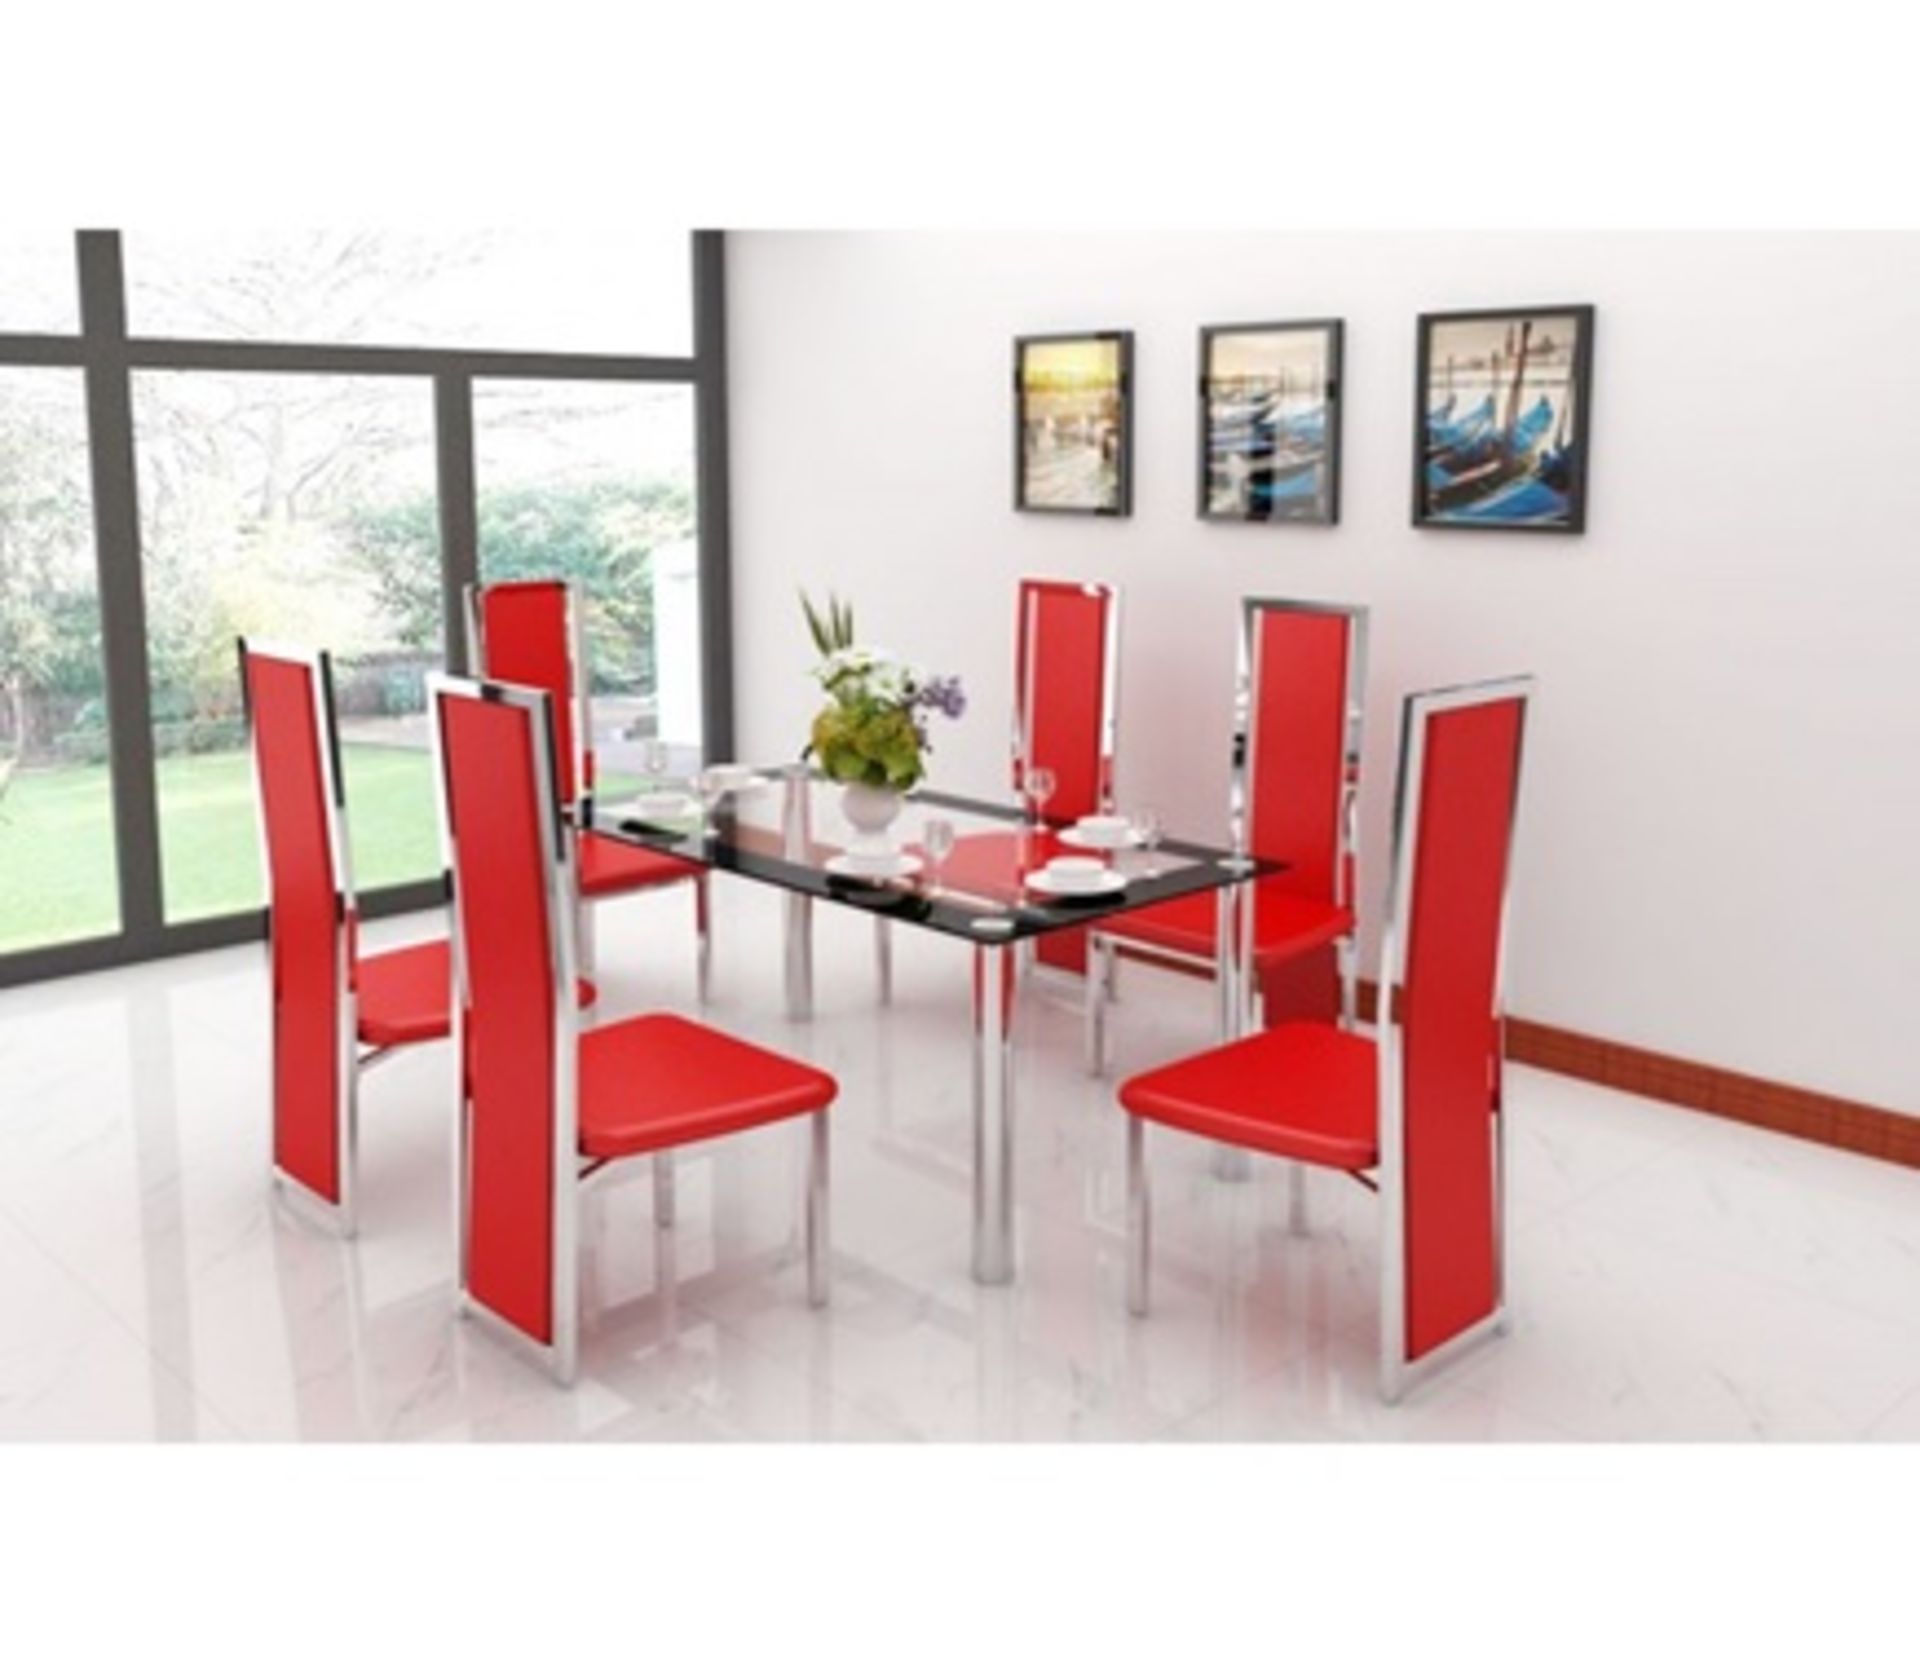 1 BRAND NEW BOXED RECTANGULAR CLEAR GLASS AND CHROME DINING TABLE WITH 4 RED FAUX LEATHER HIGHBACK